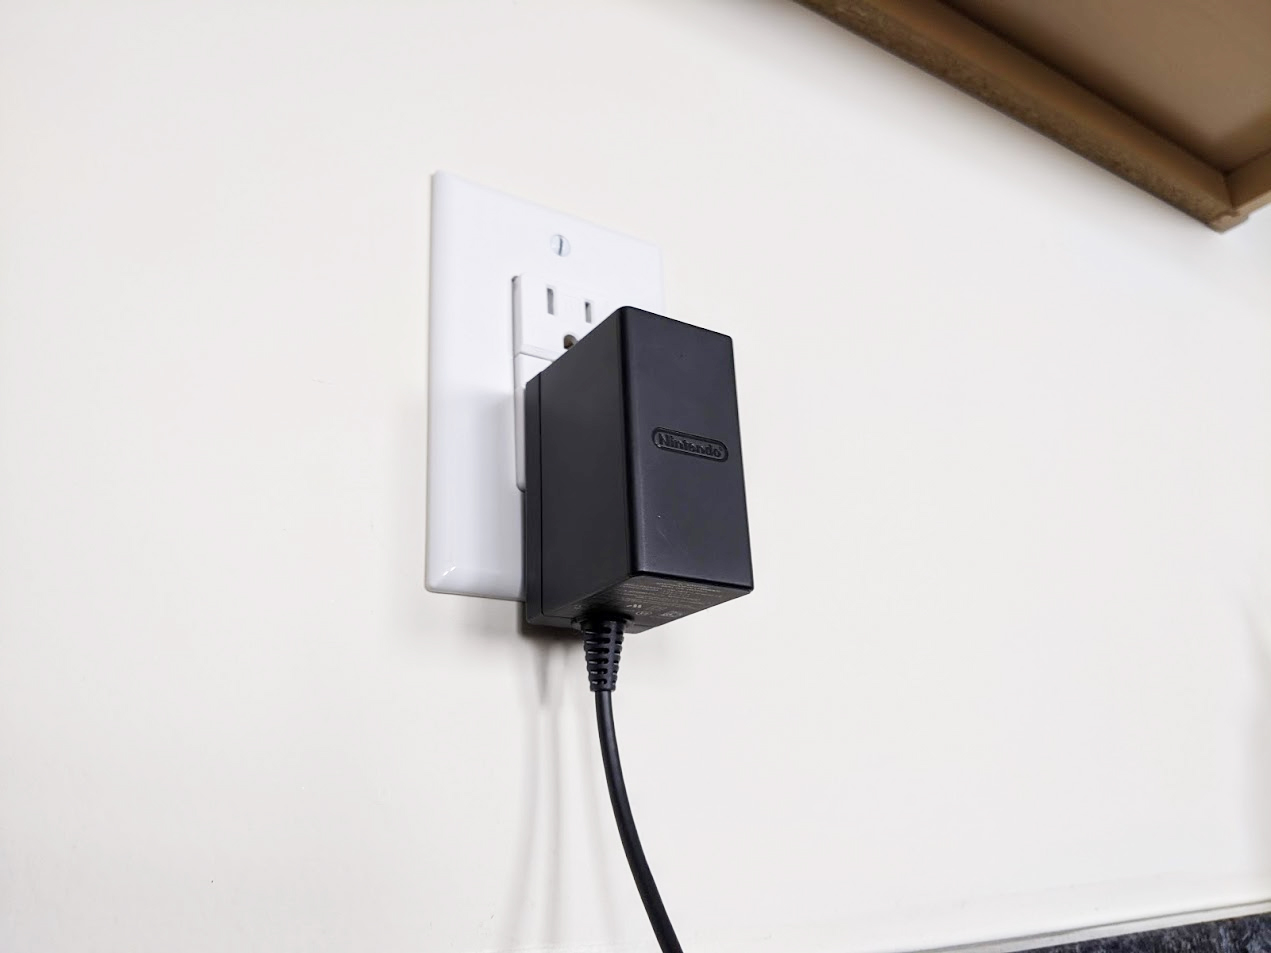 What to do if your Nintendo Switch won't charge: Plug the charger directly into an outlet